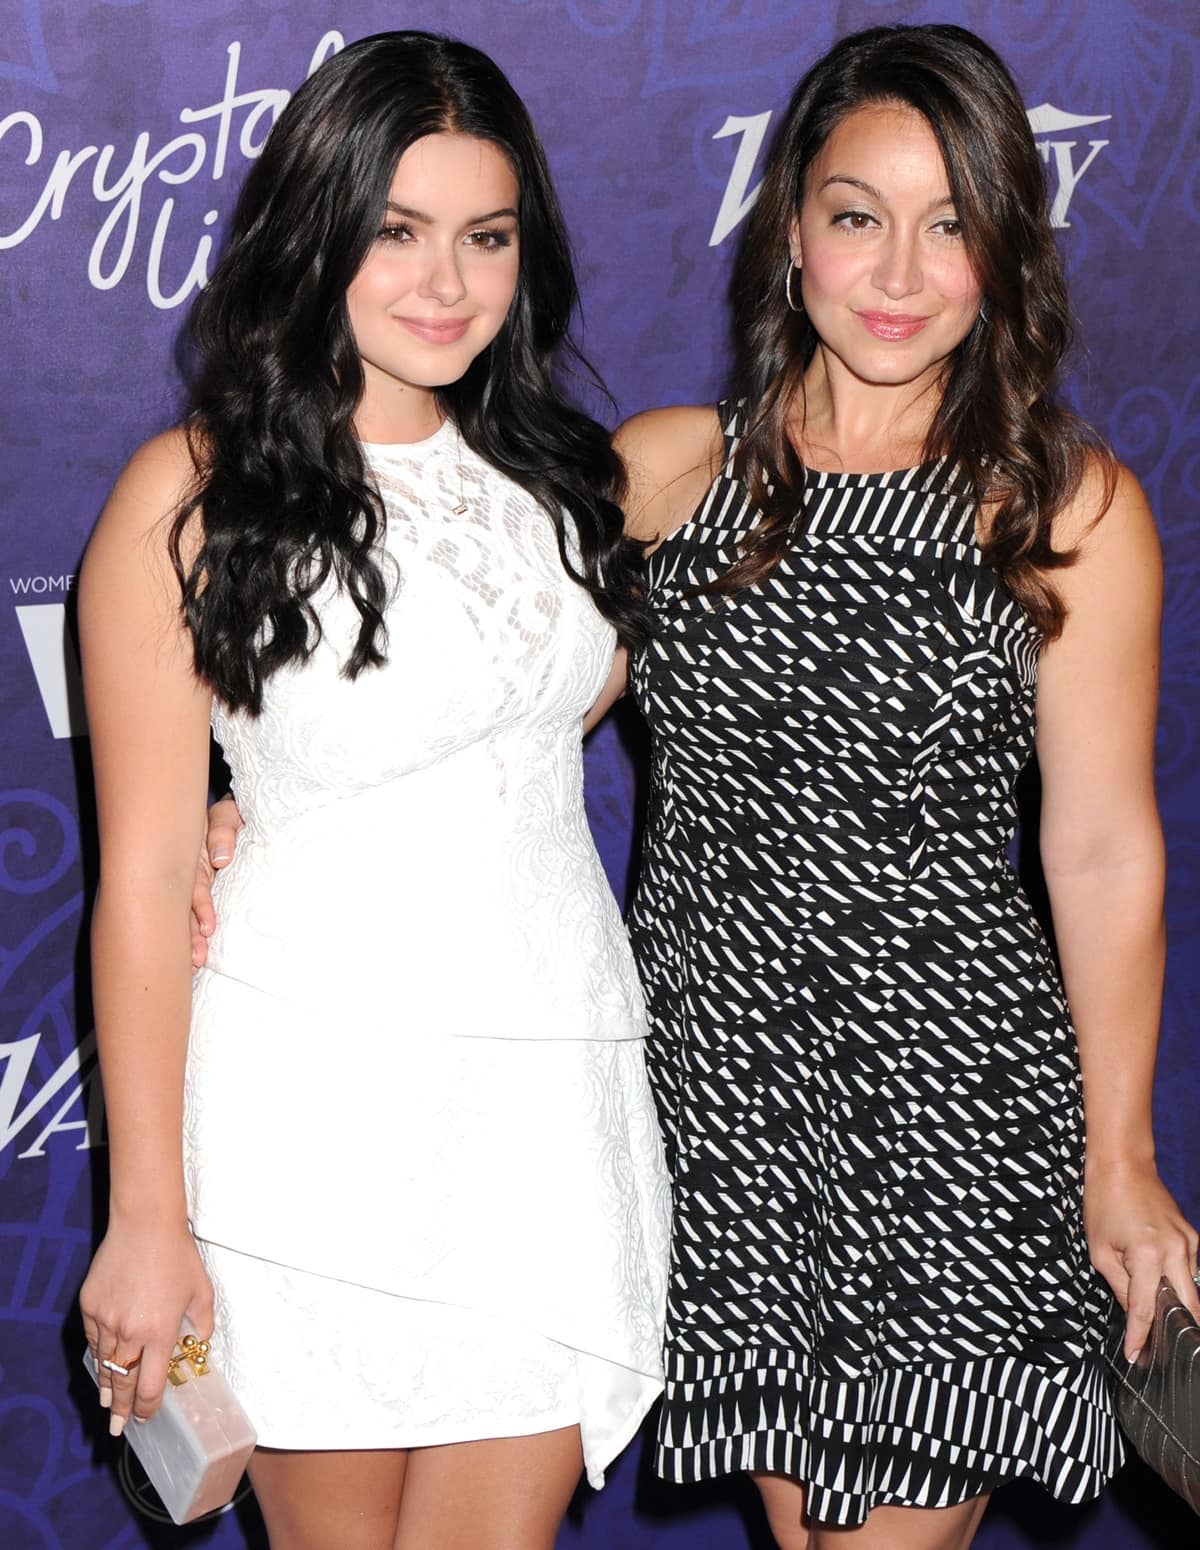 Ariel Winter's sister, Shanelle Workman, became her legal guardian in 2013 after Ariel accused her mother, Chrisoula Workman, of physical and emotional abuse